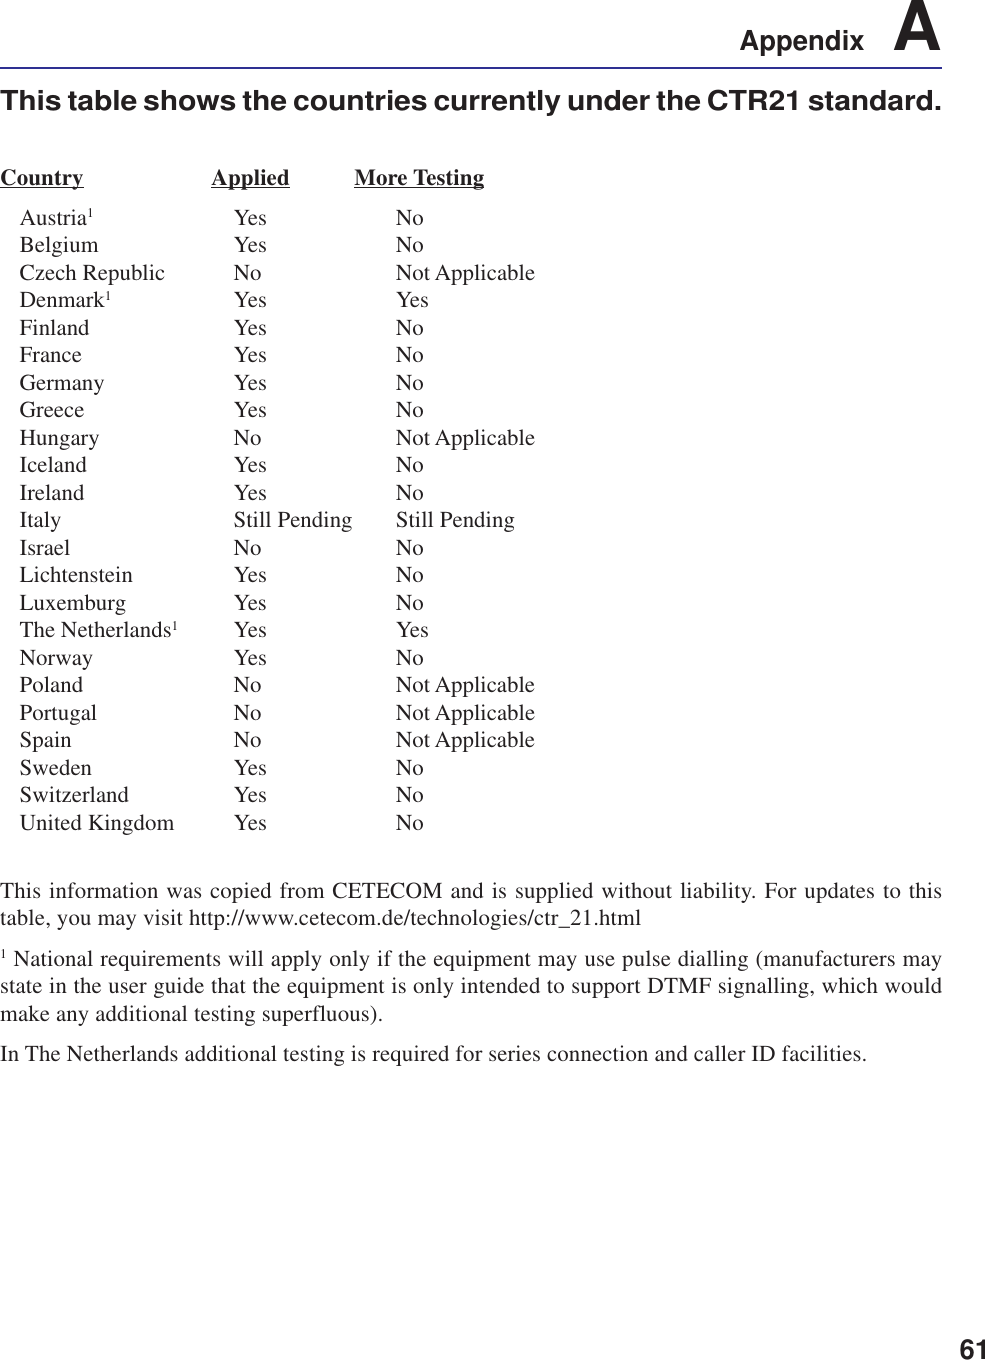 61Appendix    AThis table shows the countries currently under the CTR21 standard.Country     Applied More TestingAustria1Yes NoBelgium Yes NoCzech Republic No Not ApplicableDenmark1Yes YesFinland Yes NoFrance Yes NoGermany Yes NoGreece Yes NoHungary No Not ApplicableIceland Yes NoIreland Yes NoItaly Still Pending Still PendingIsrael No NoLichtenstein Yes NoLuxemburg Yes NoThe Netherlands1Yes YesNorway Yes NoPoland No Not ApplicablePortugal No Not ApplicableSpain No Not ApplicableSweden Yes NoSwitzerland Yes NoUnited Kingdom Yes NoThis information was copied from CETECOM and is supplied without liability. For updates to thistable, you may visit http://www.cetecom.de/technologies/ctr_21.html1 National requirements will apply only if the equipment may use pulse dialling (manufacturers maystate in the user guide that the equipment is only intended to support DTMF signalling, which wouldmake any additional testing superfluous).In The Netherlands additional testing is required for series connection and caller ID facilities.